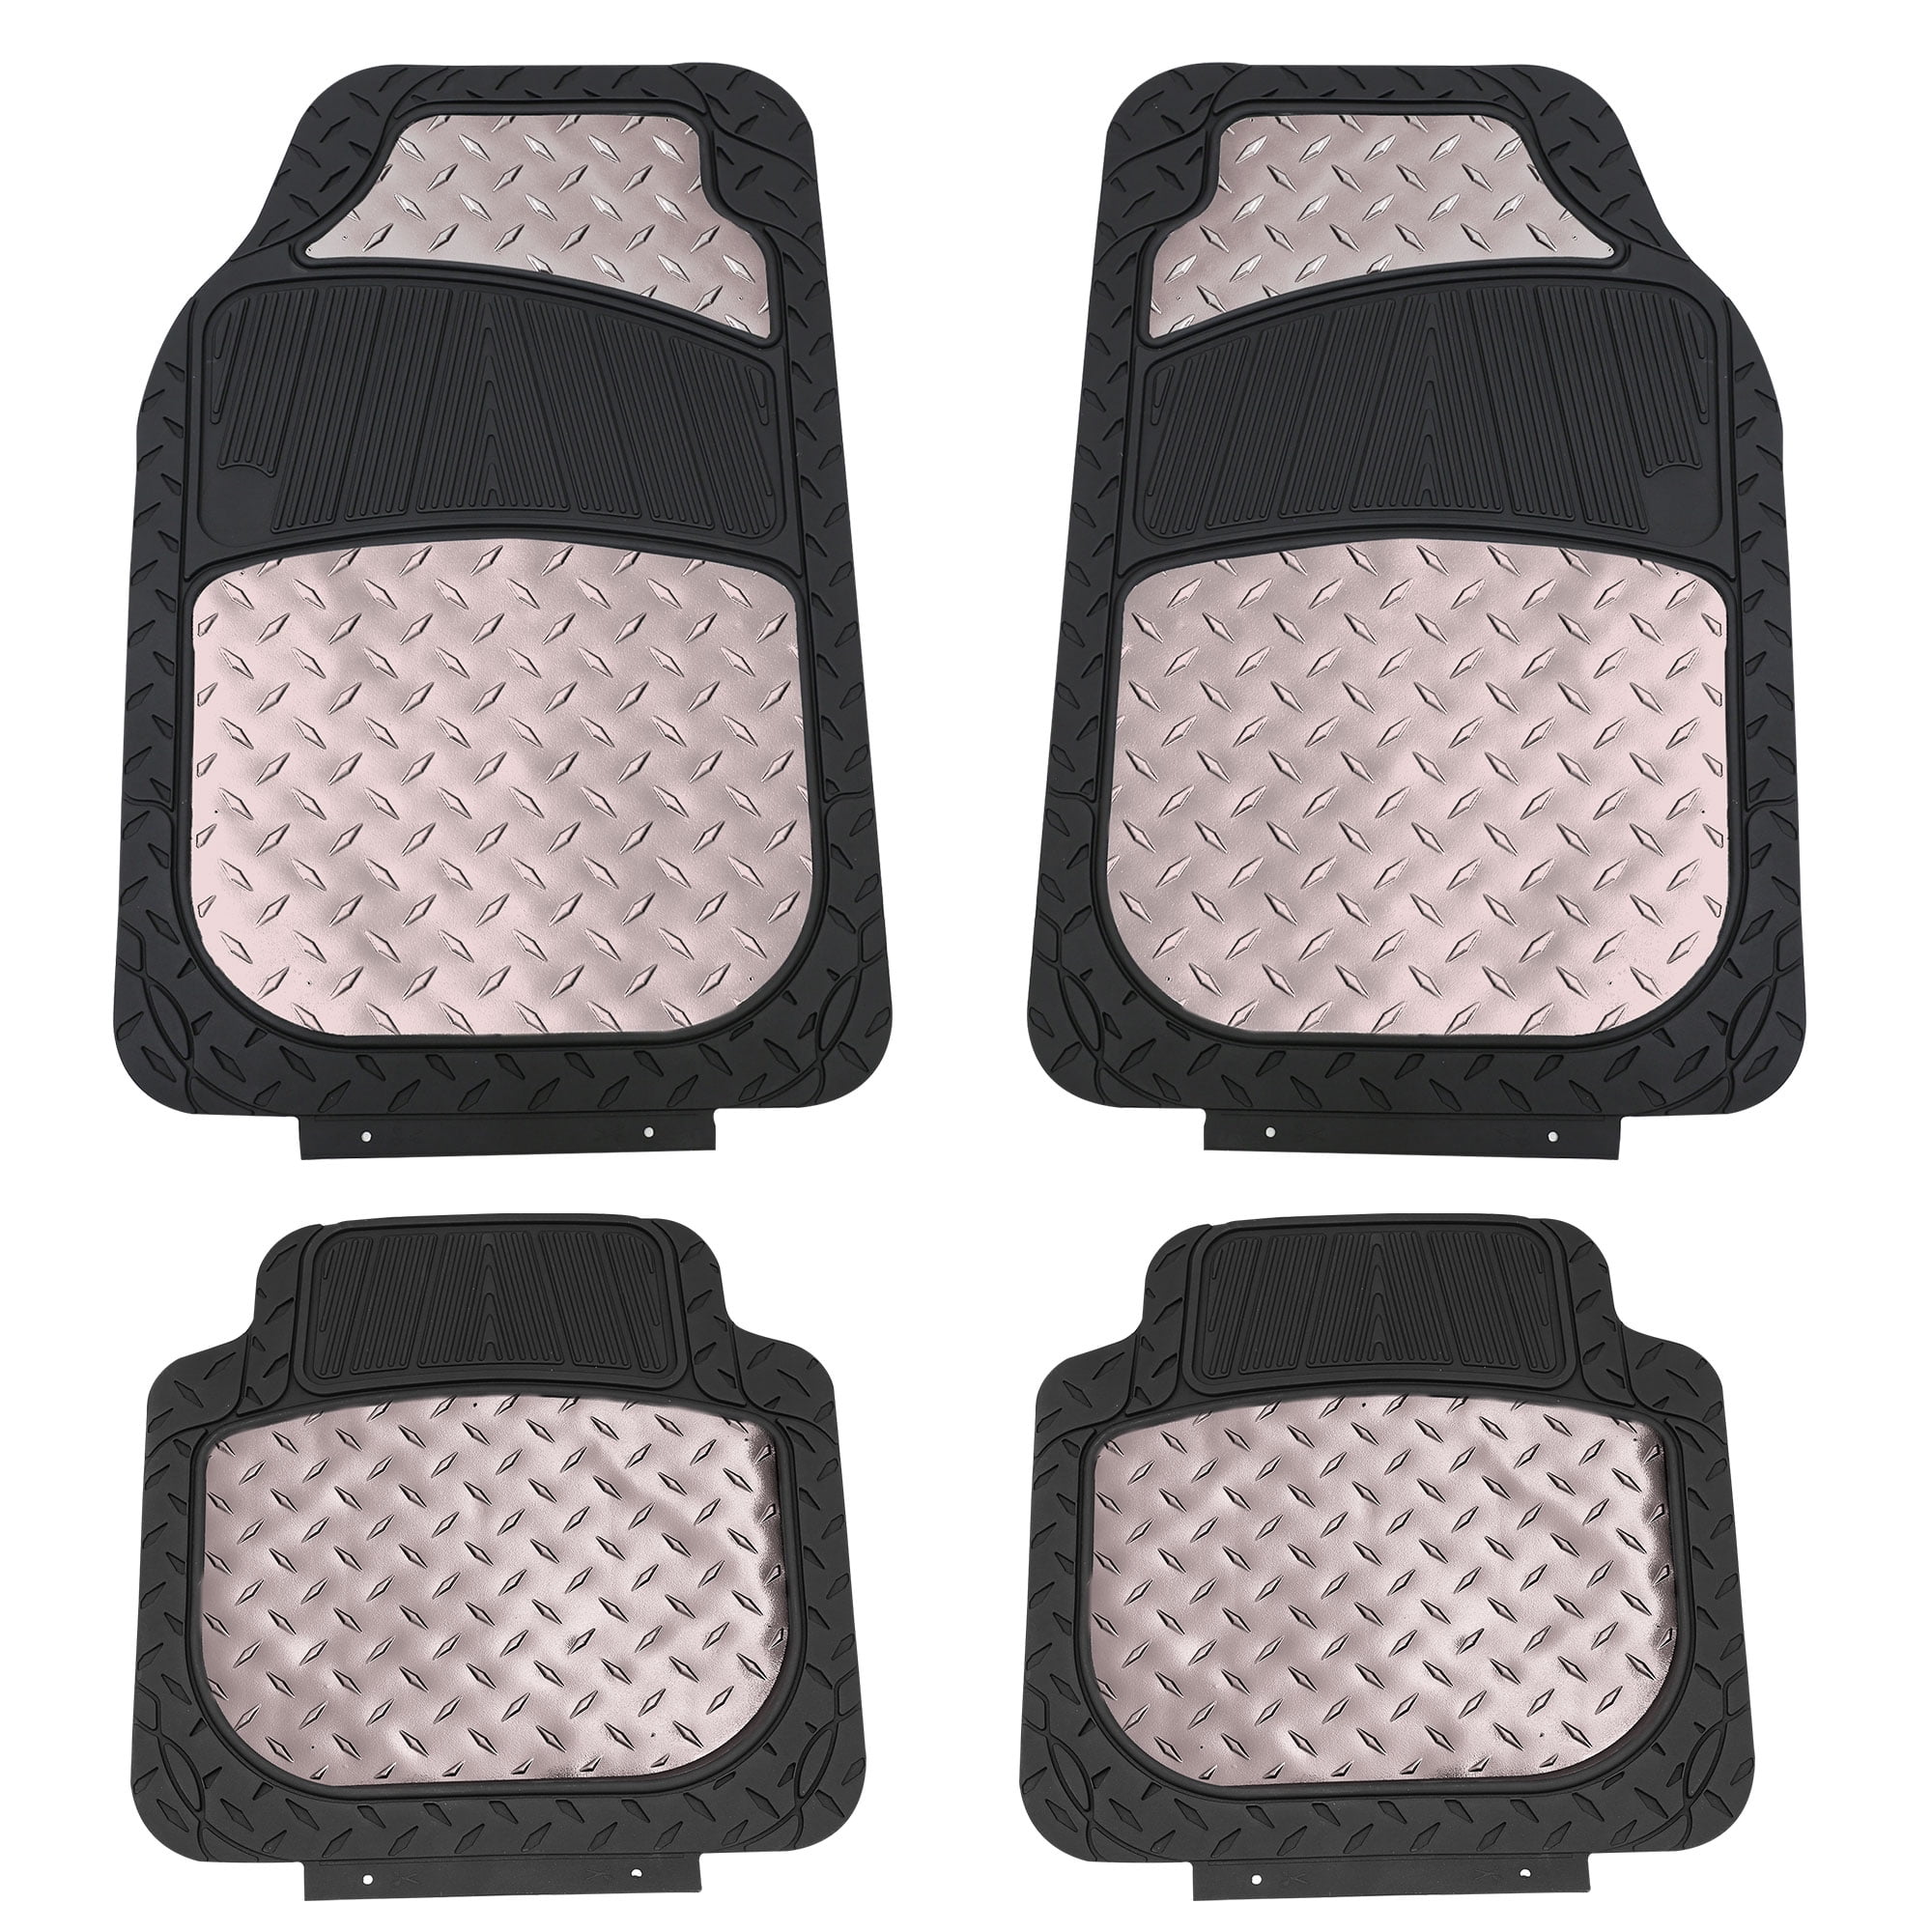 FH Group Universal Fit Car Floor Mats Metallic Rubber Mats Full Set - Space  Gray F11315SPACEGRAY 